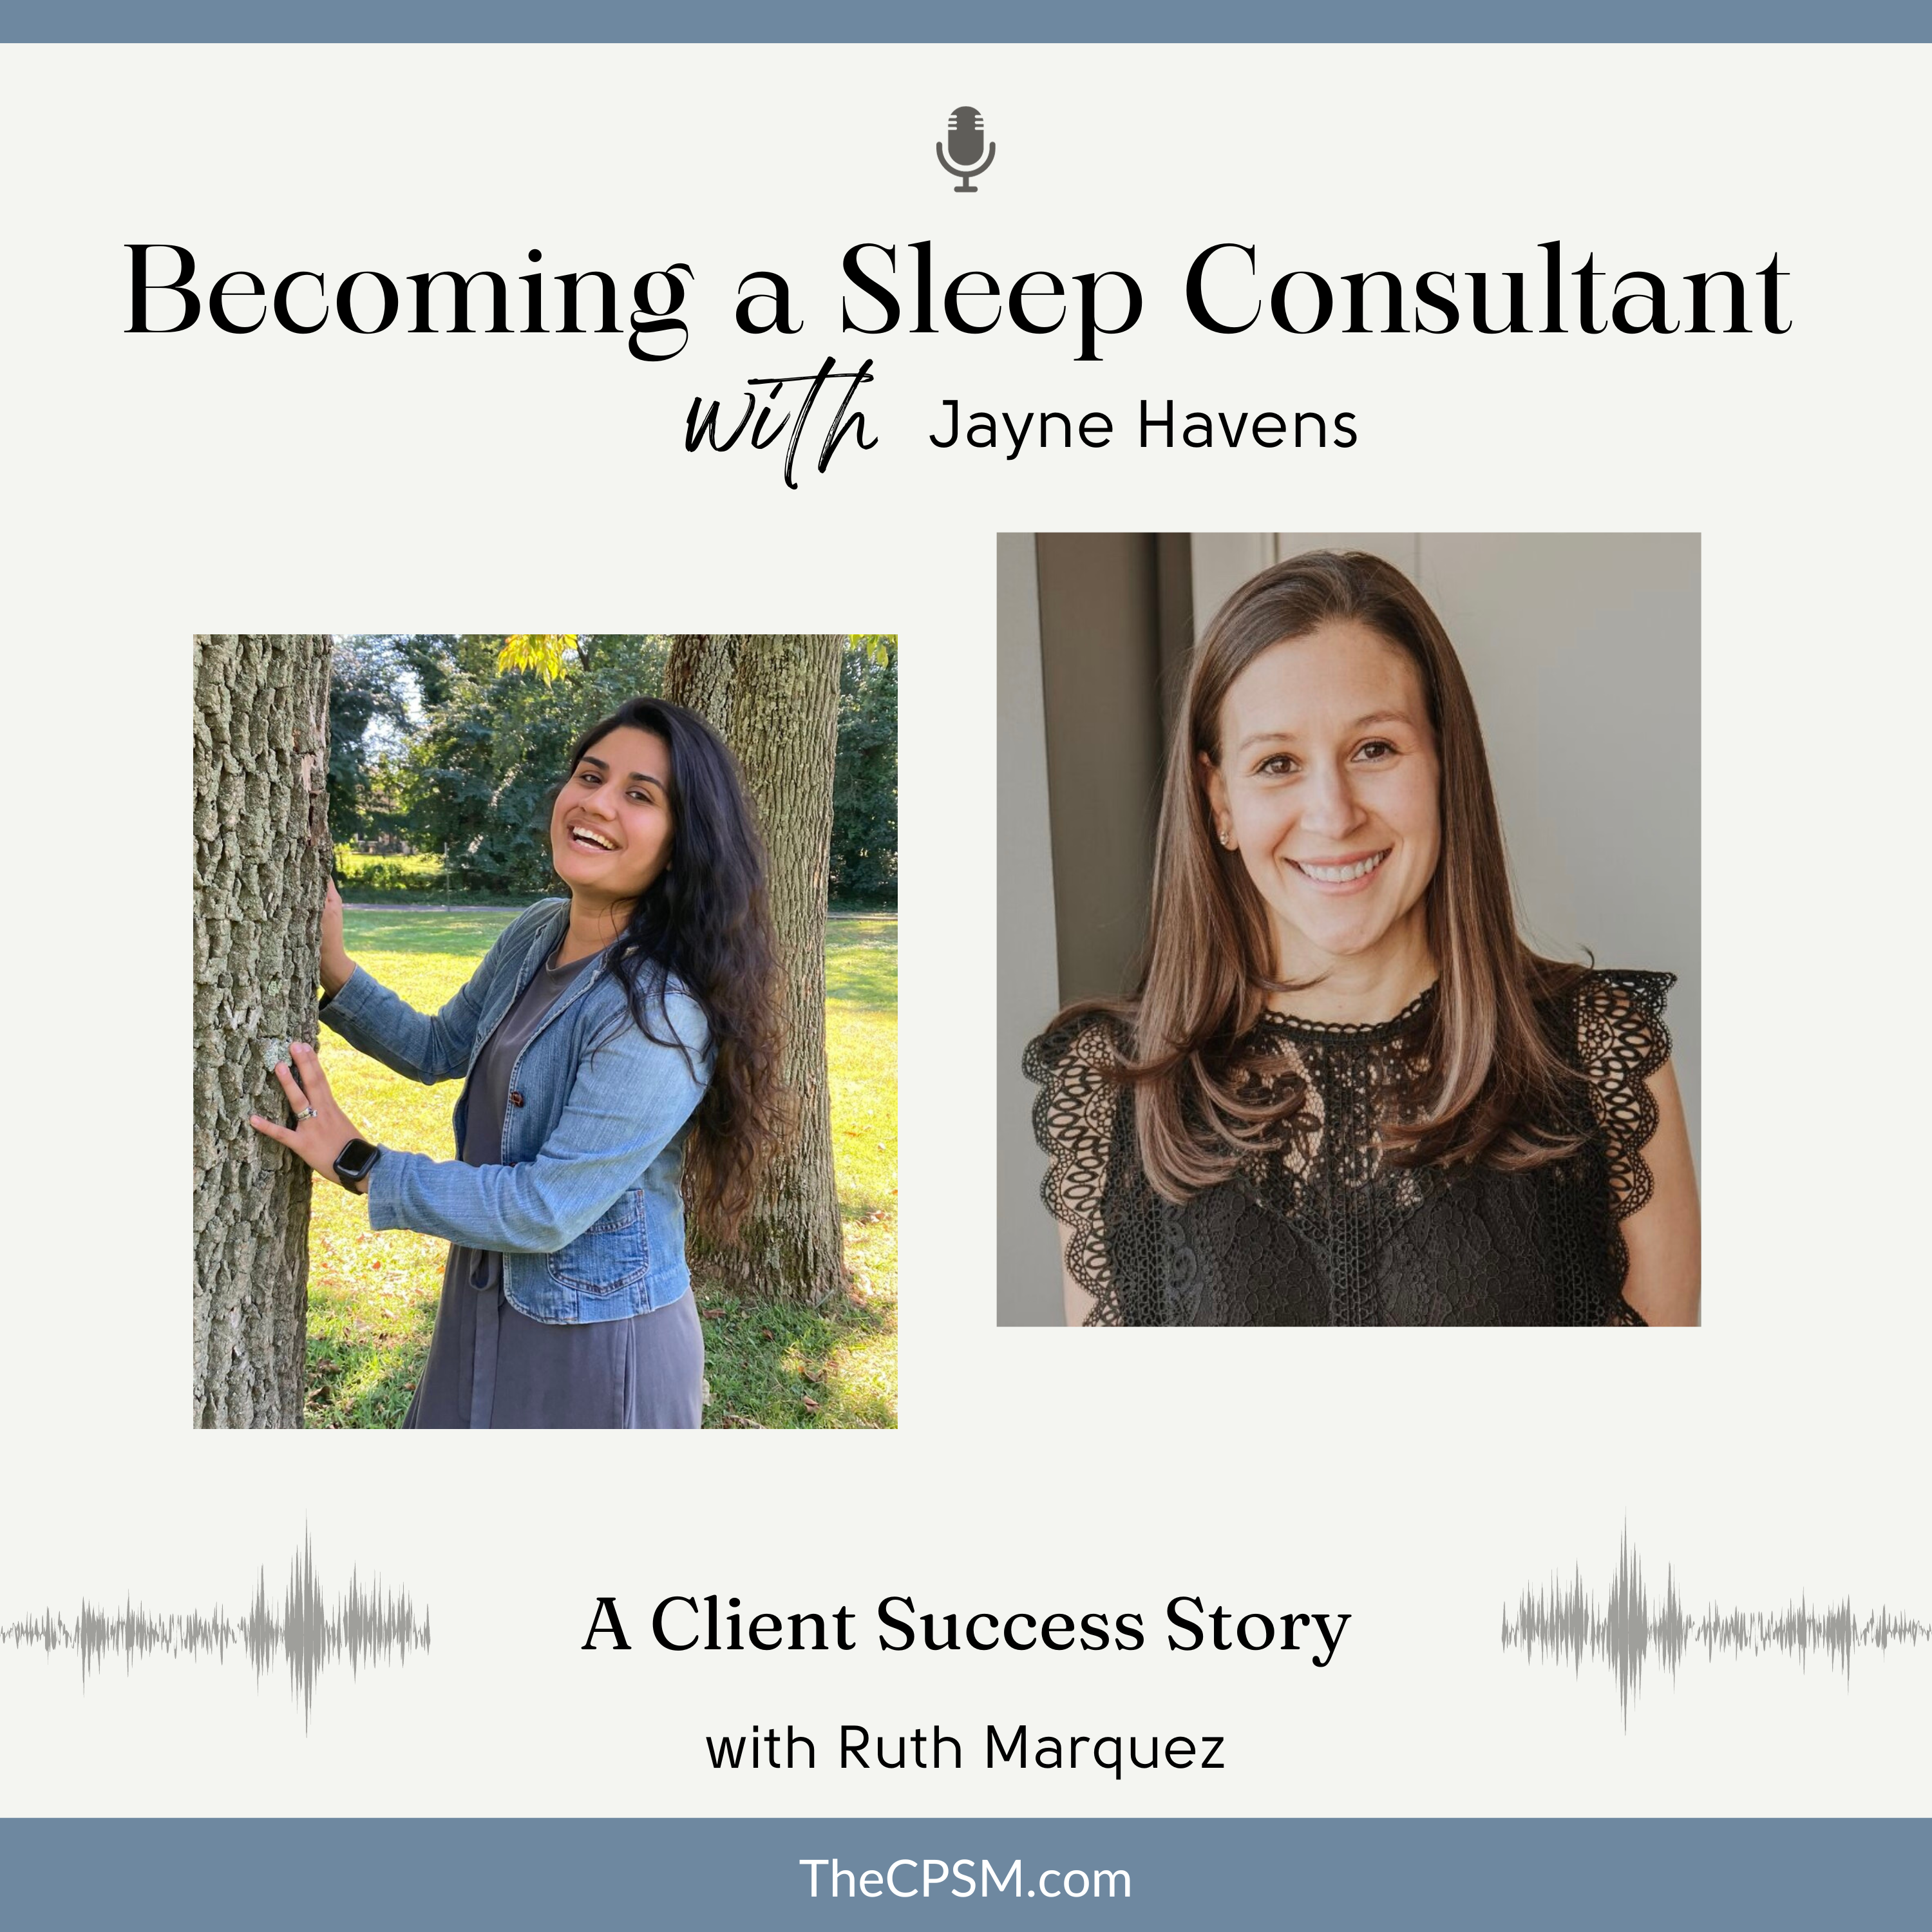 A Client Success Story, with Ruth Marquez